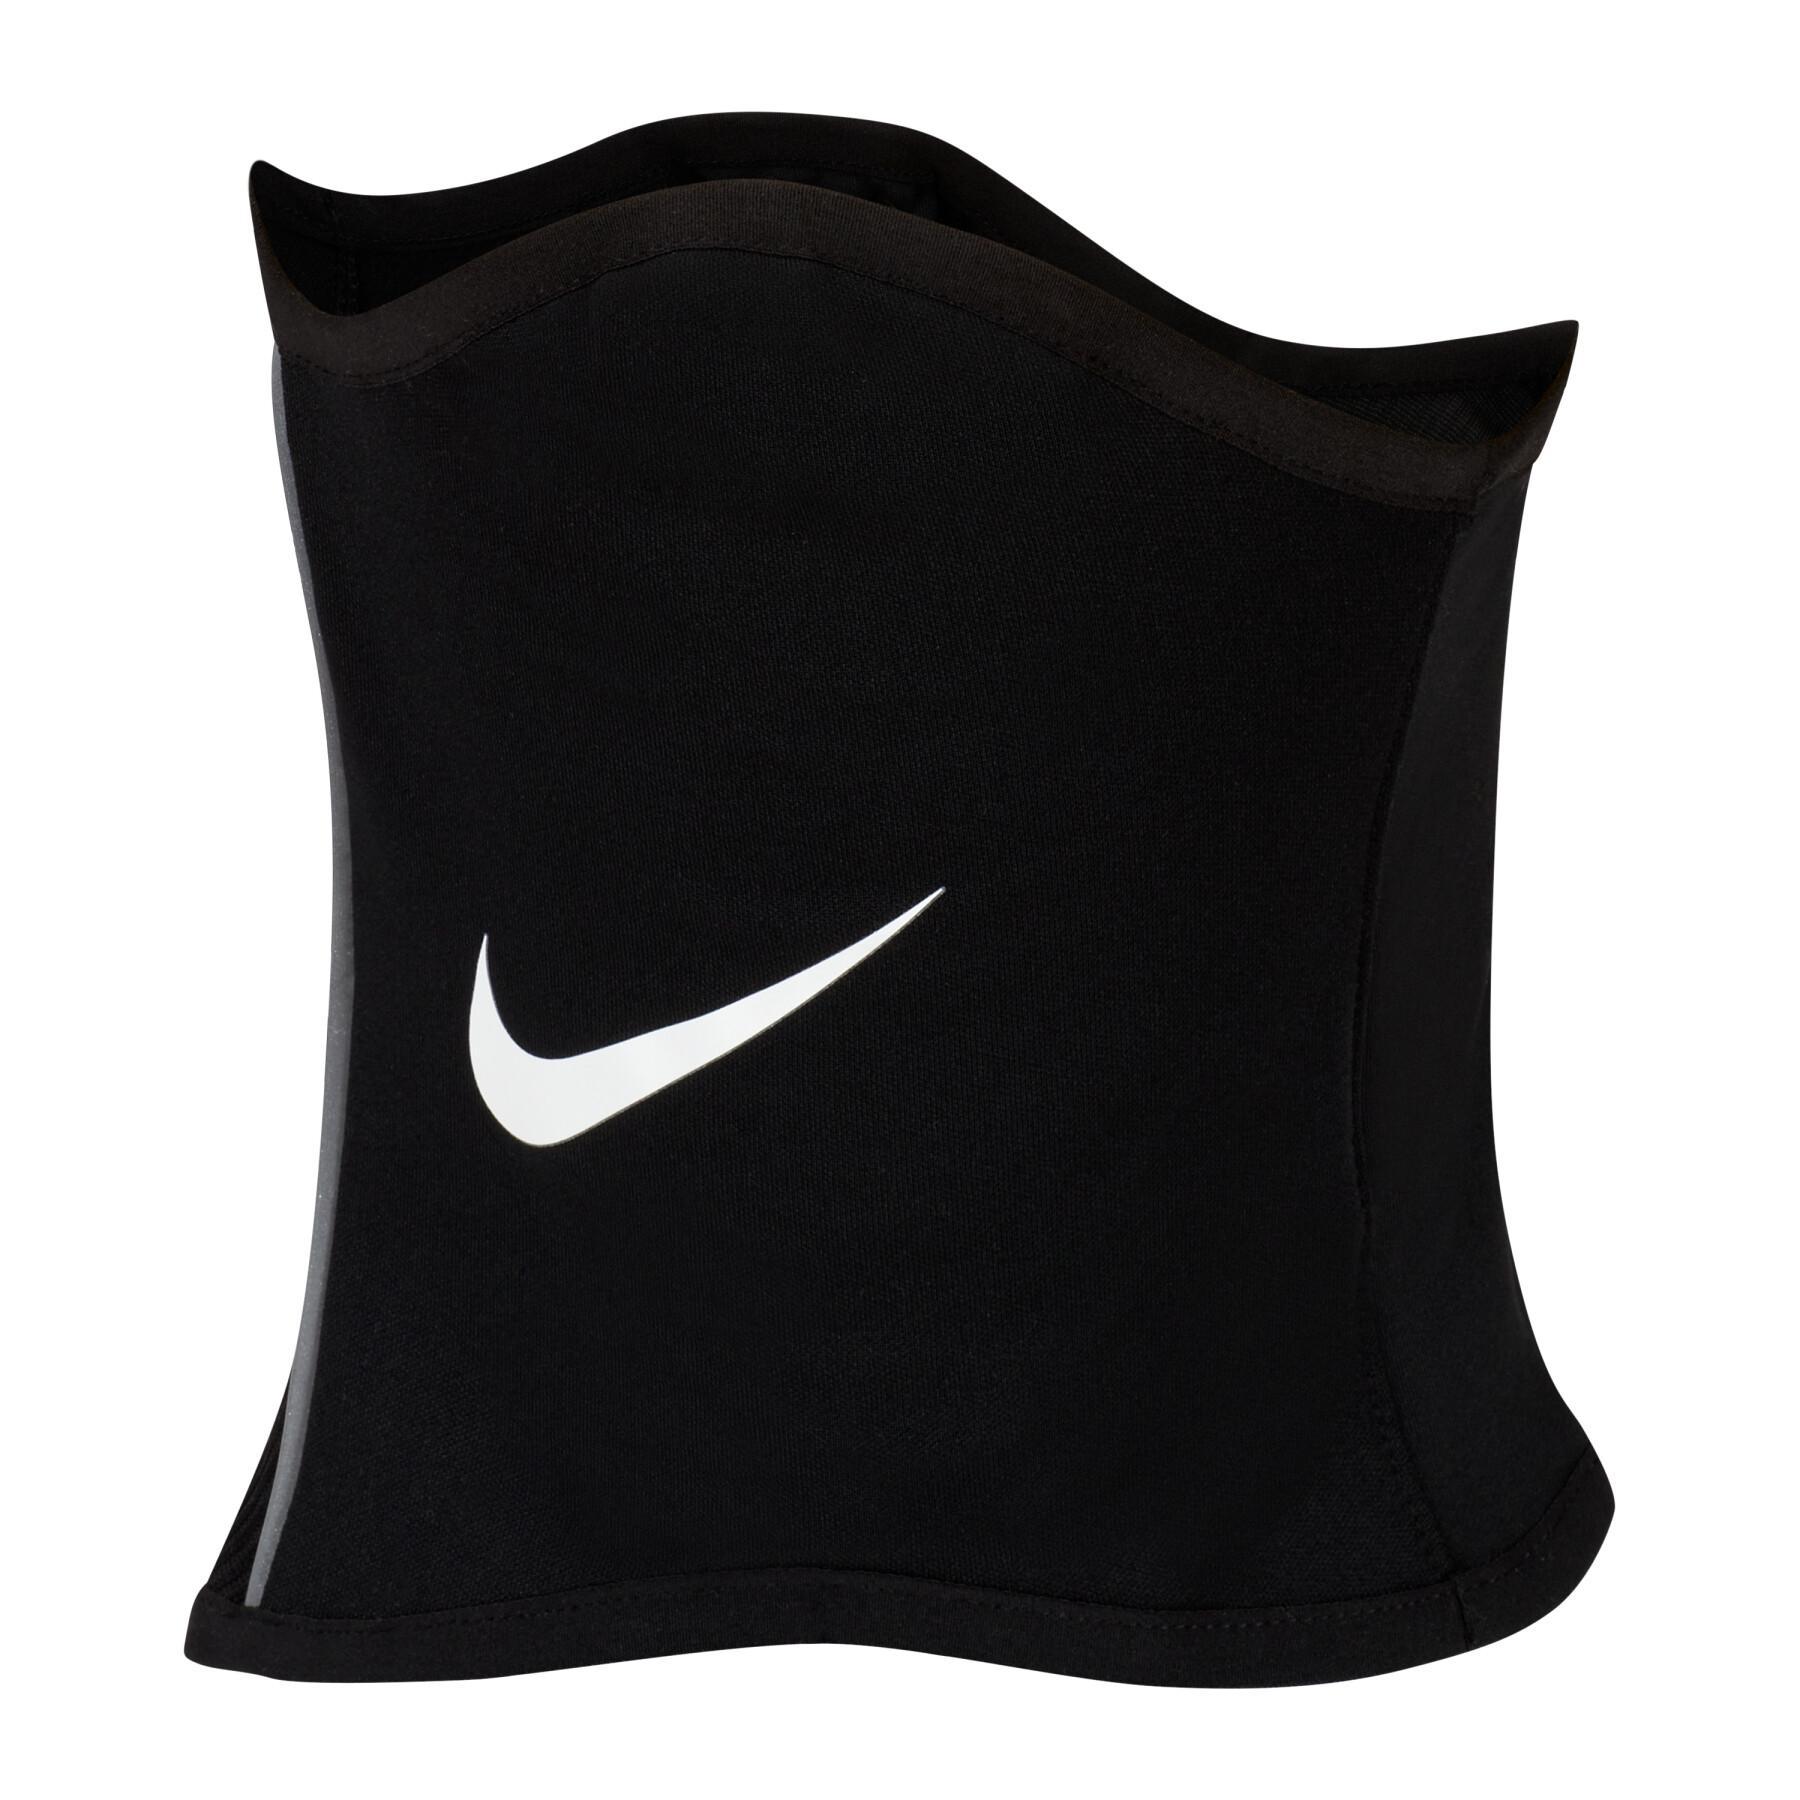 Neck cover Nike dynamic fit strikee